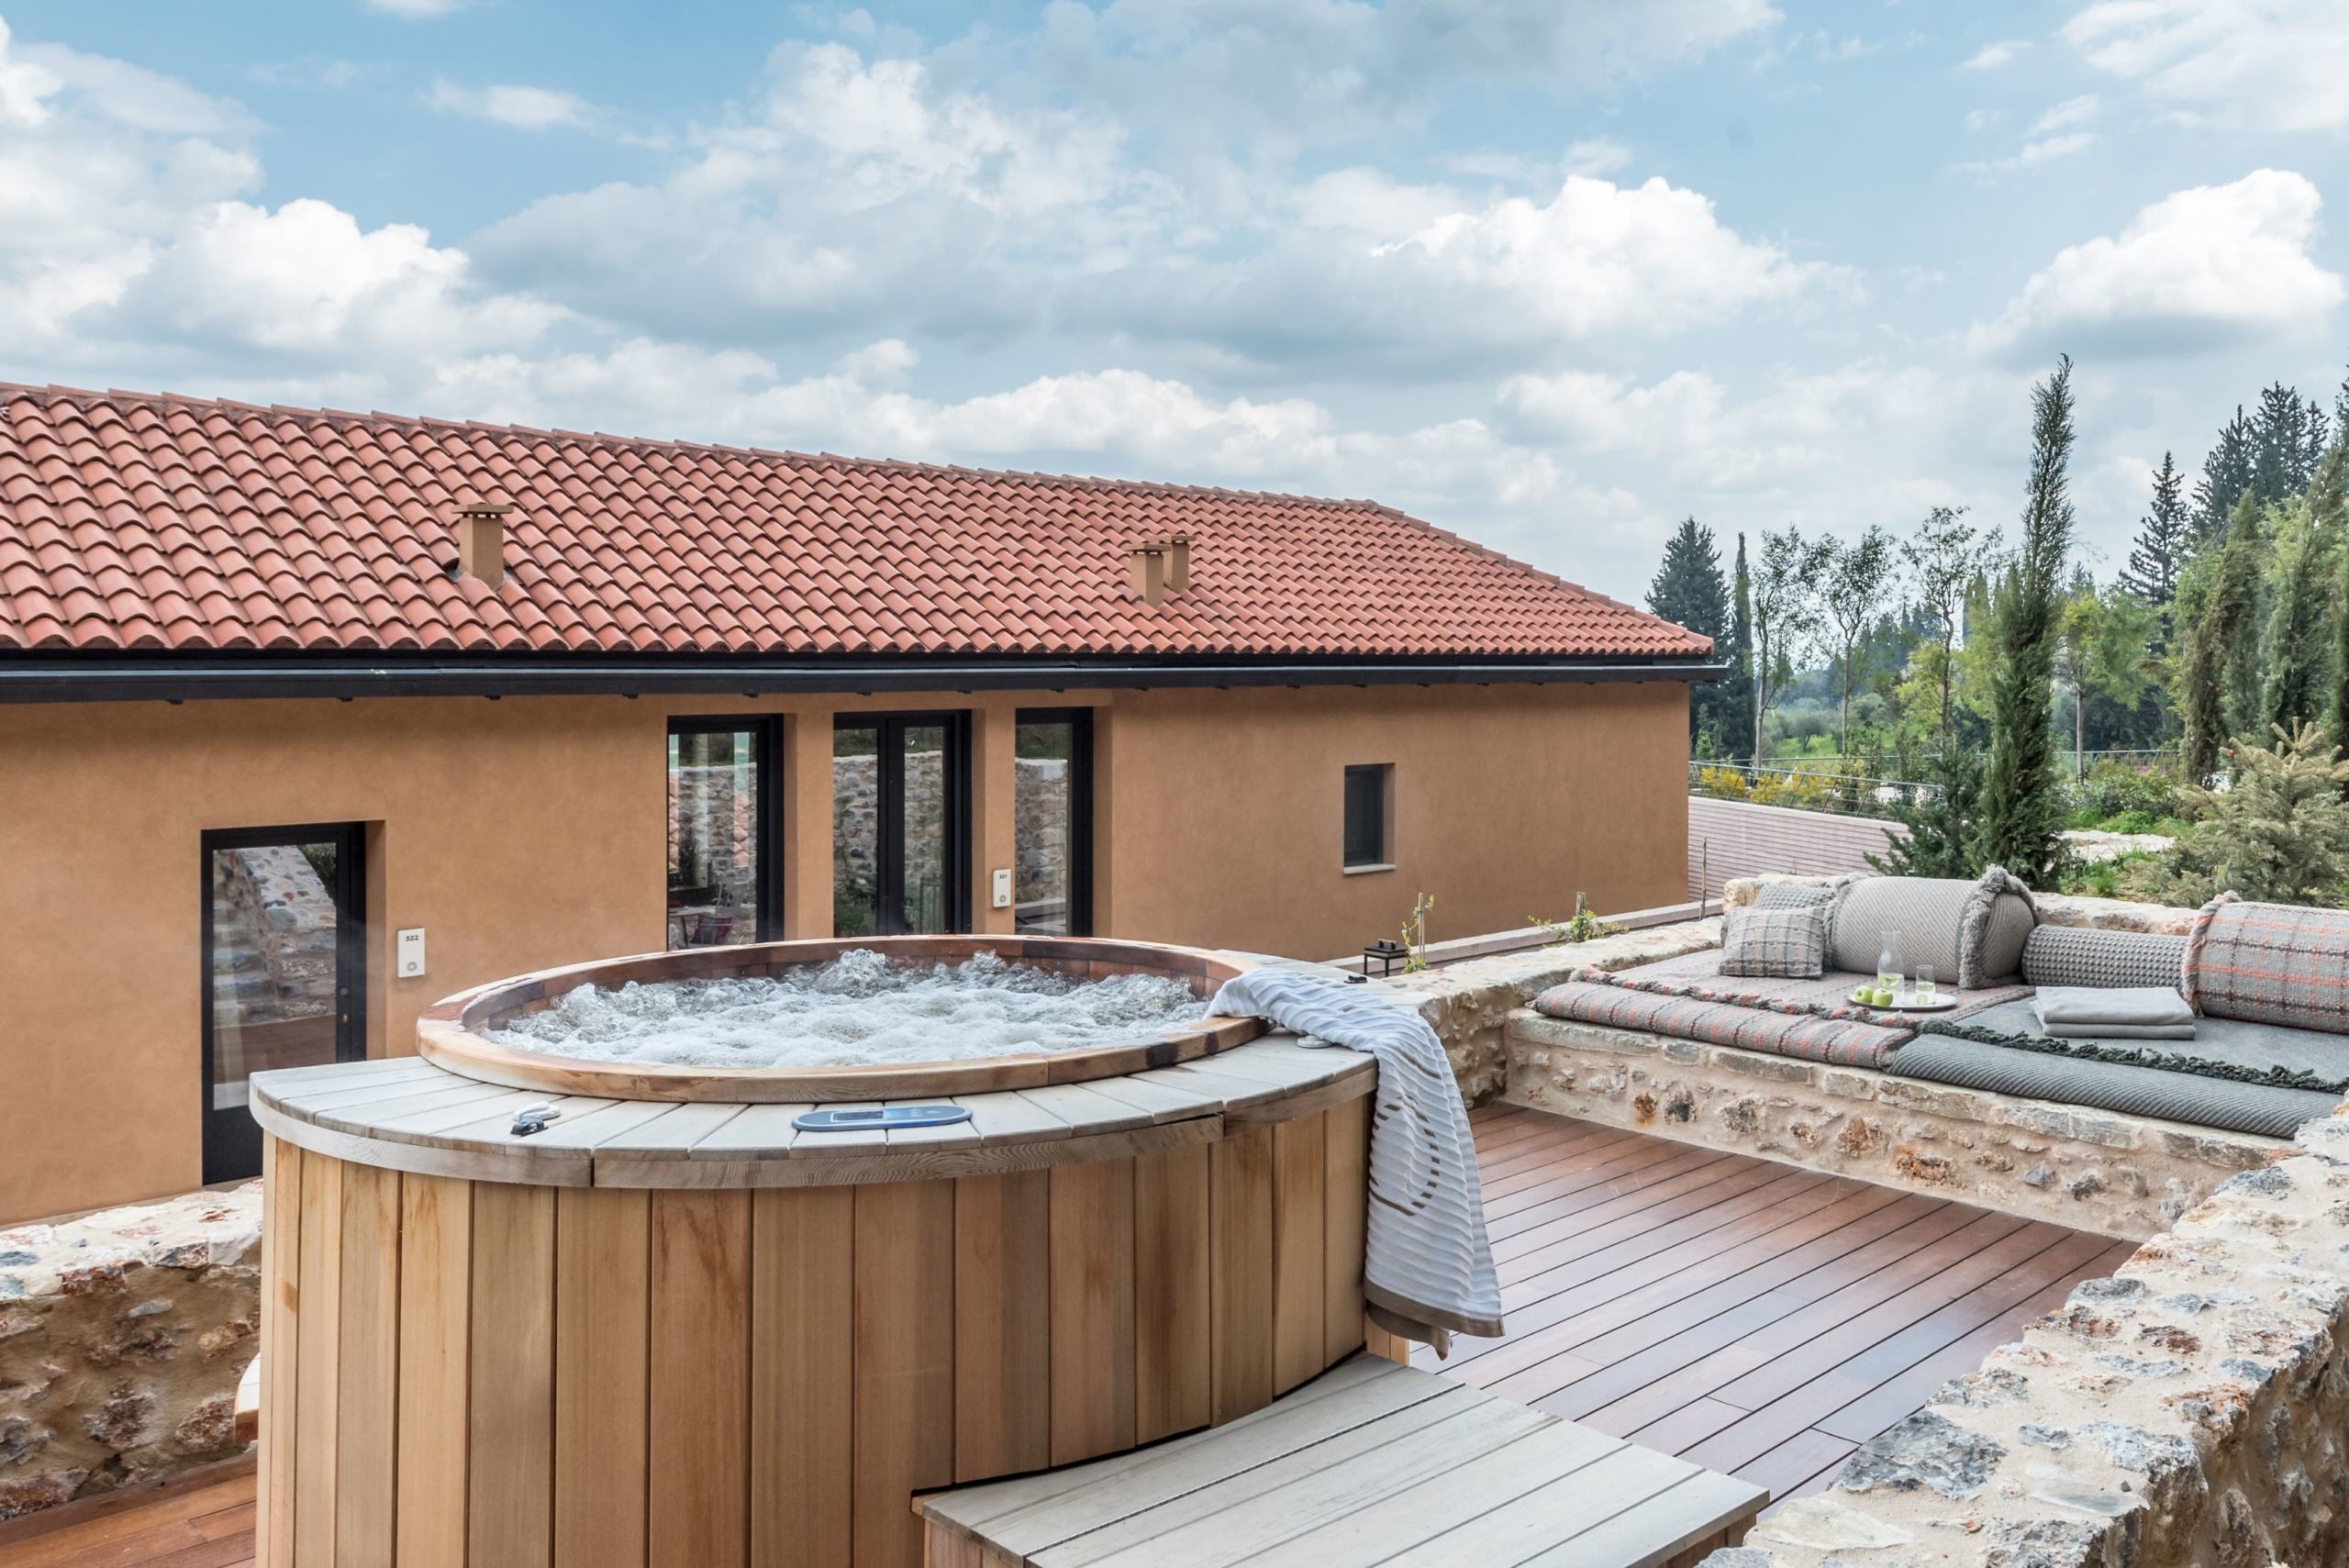 Outdoor hot tub and decked area of a byzantium suite at Euphoria Greece